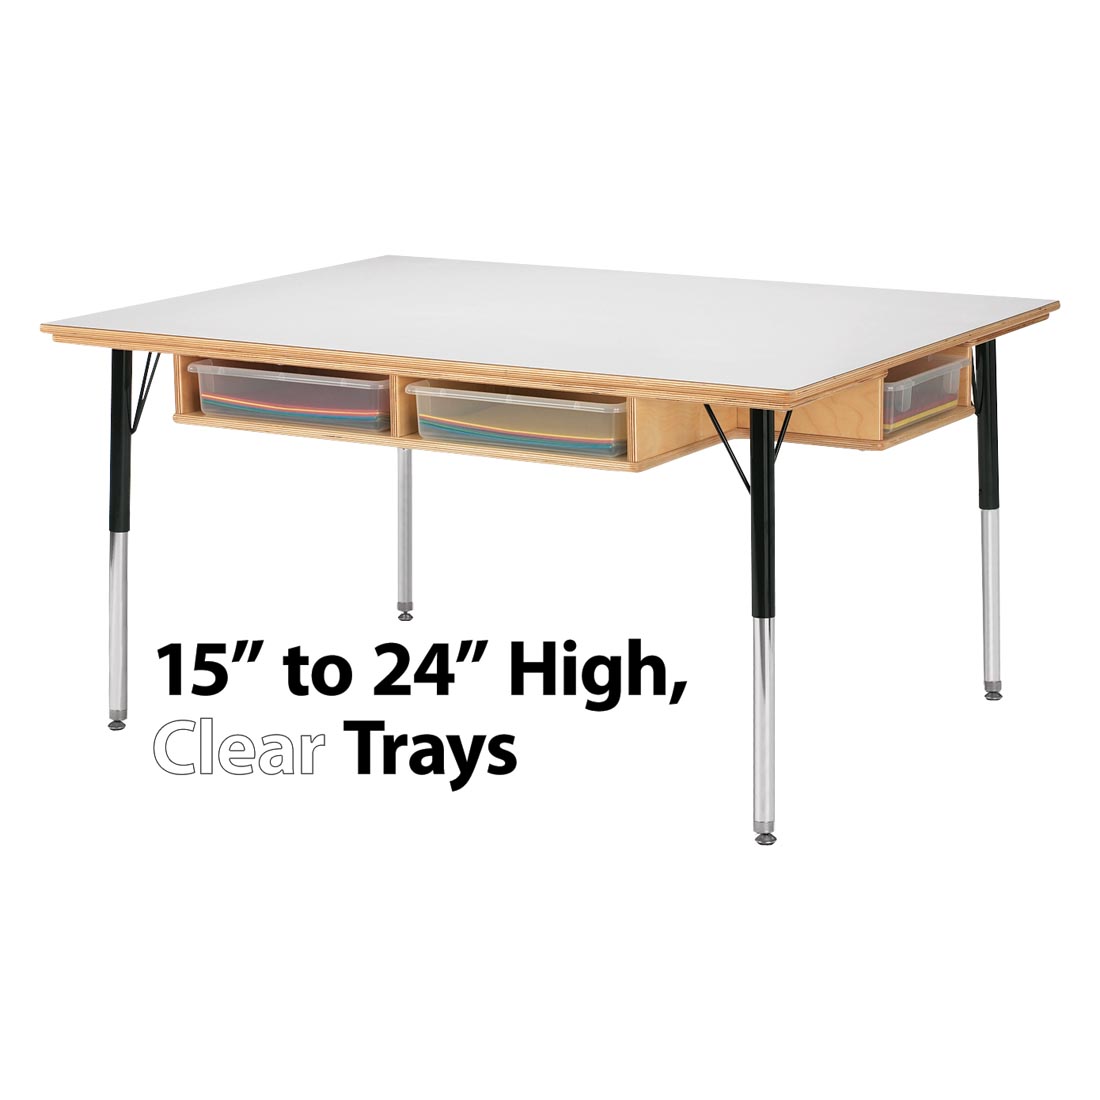 Table With Clear Storage Trays with the text 15" to 24" High, Clear Trays